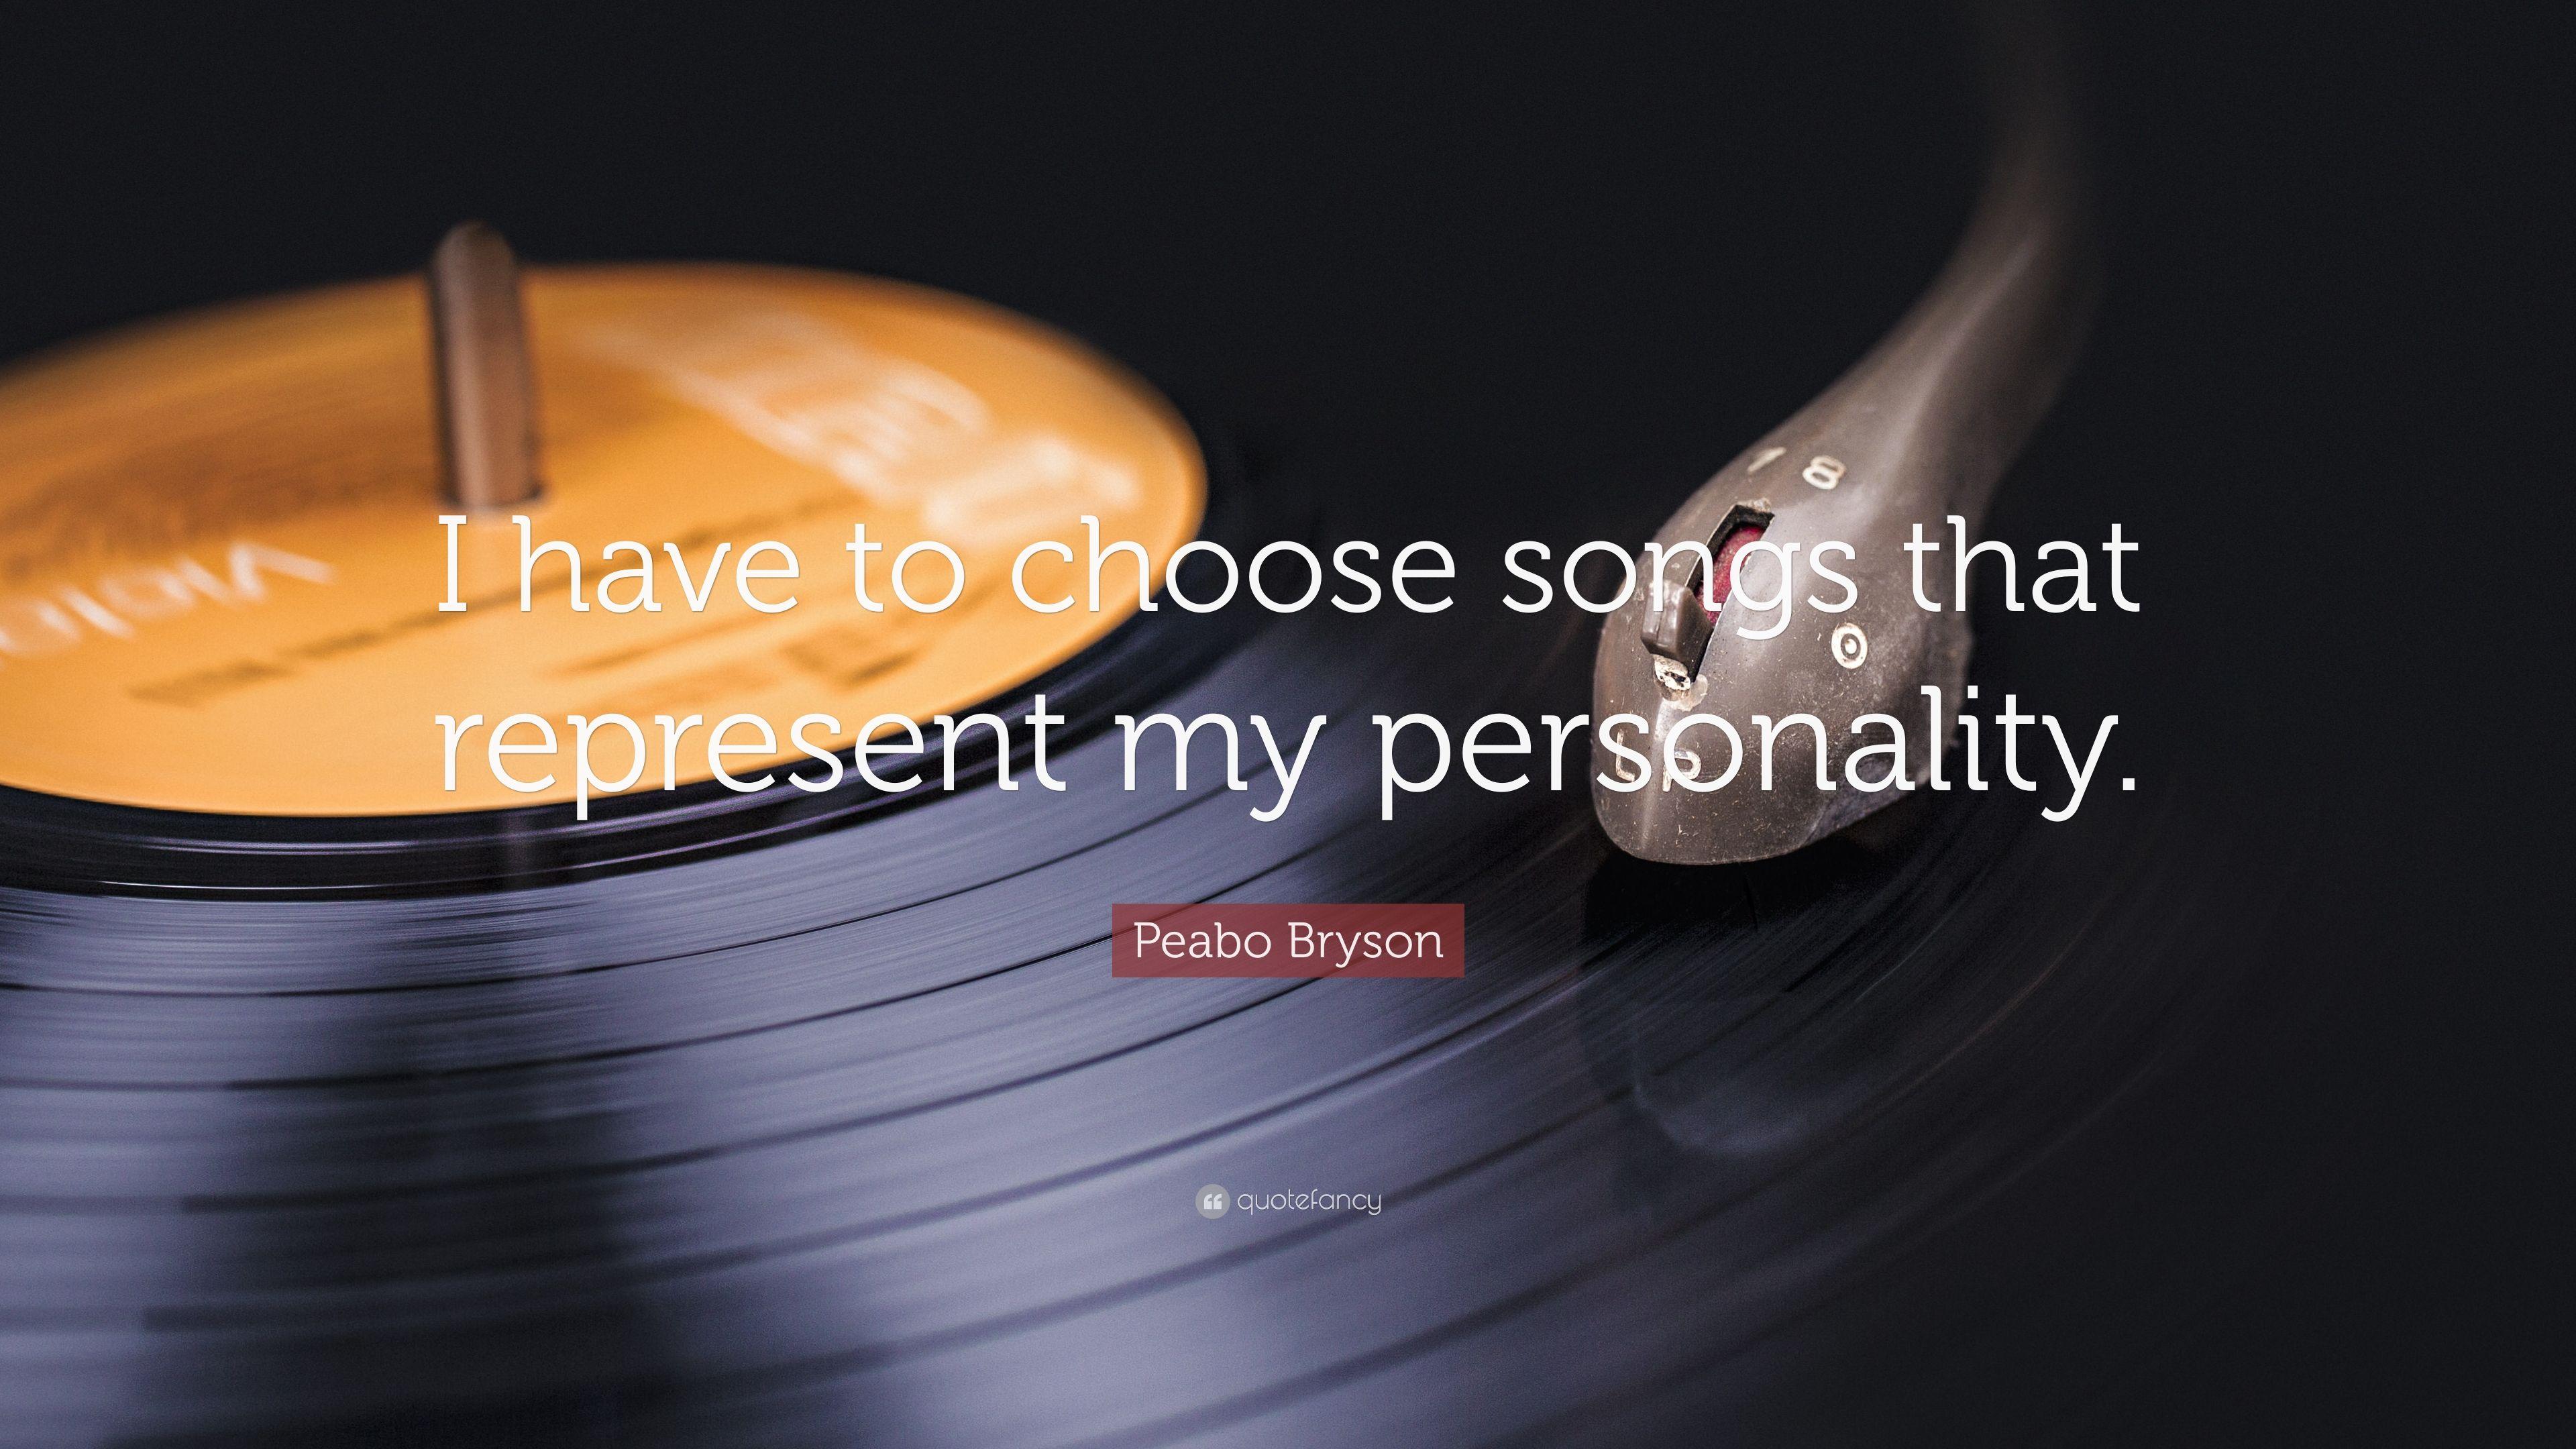 Peabo Bryson Quote: “I have to choose songs that represent my